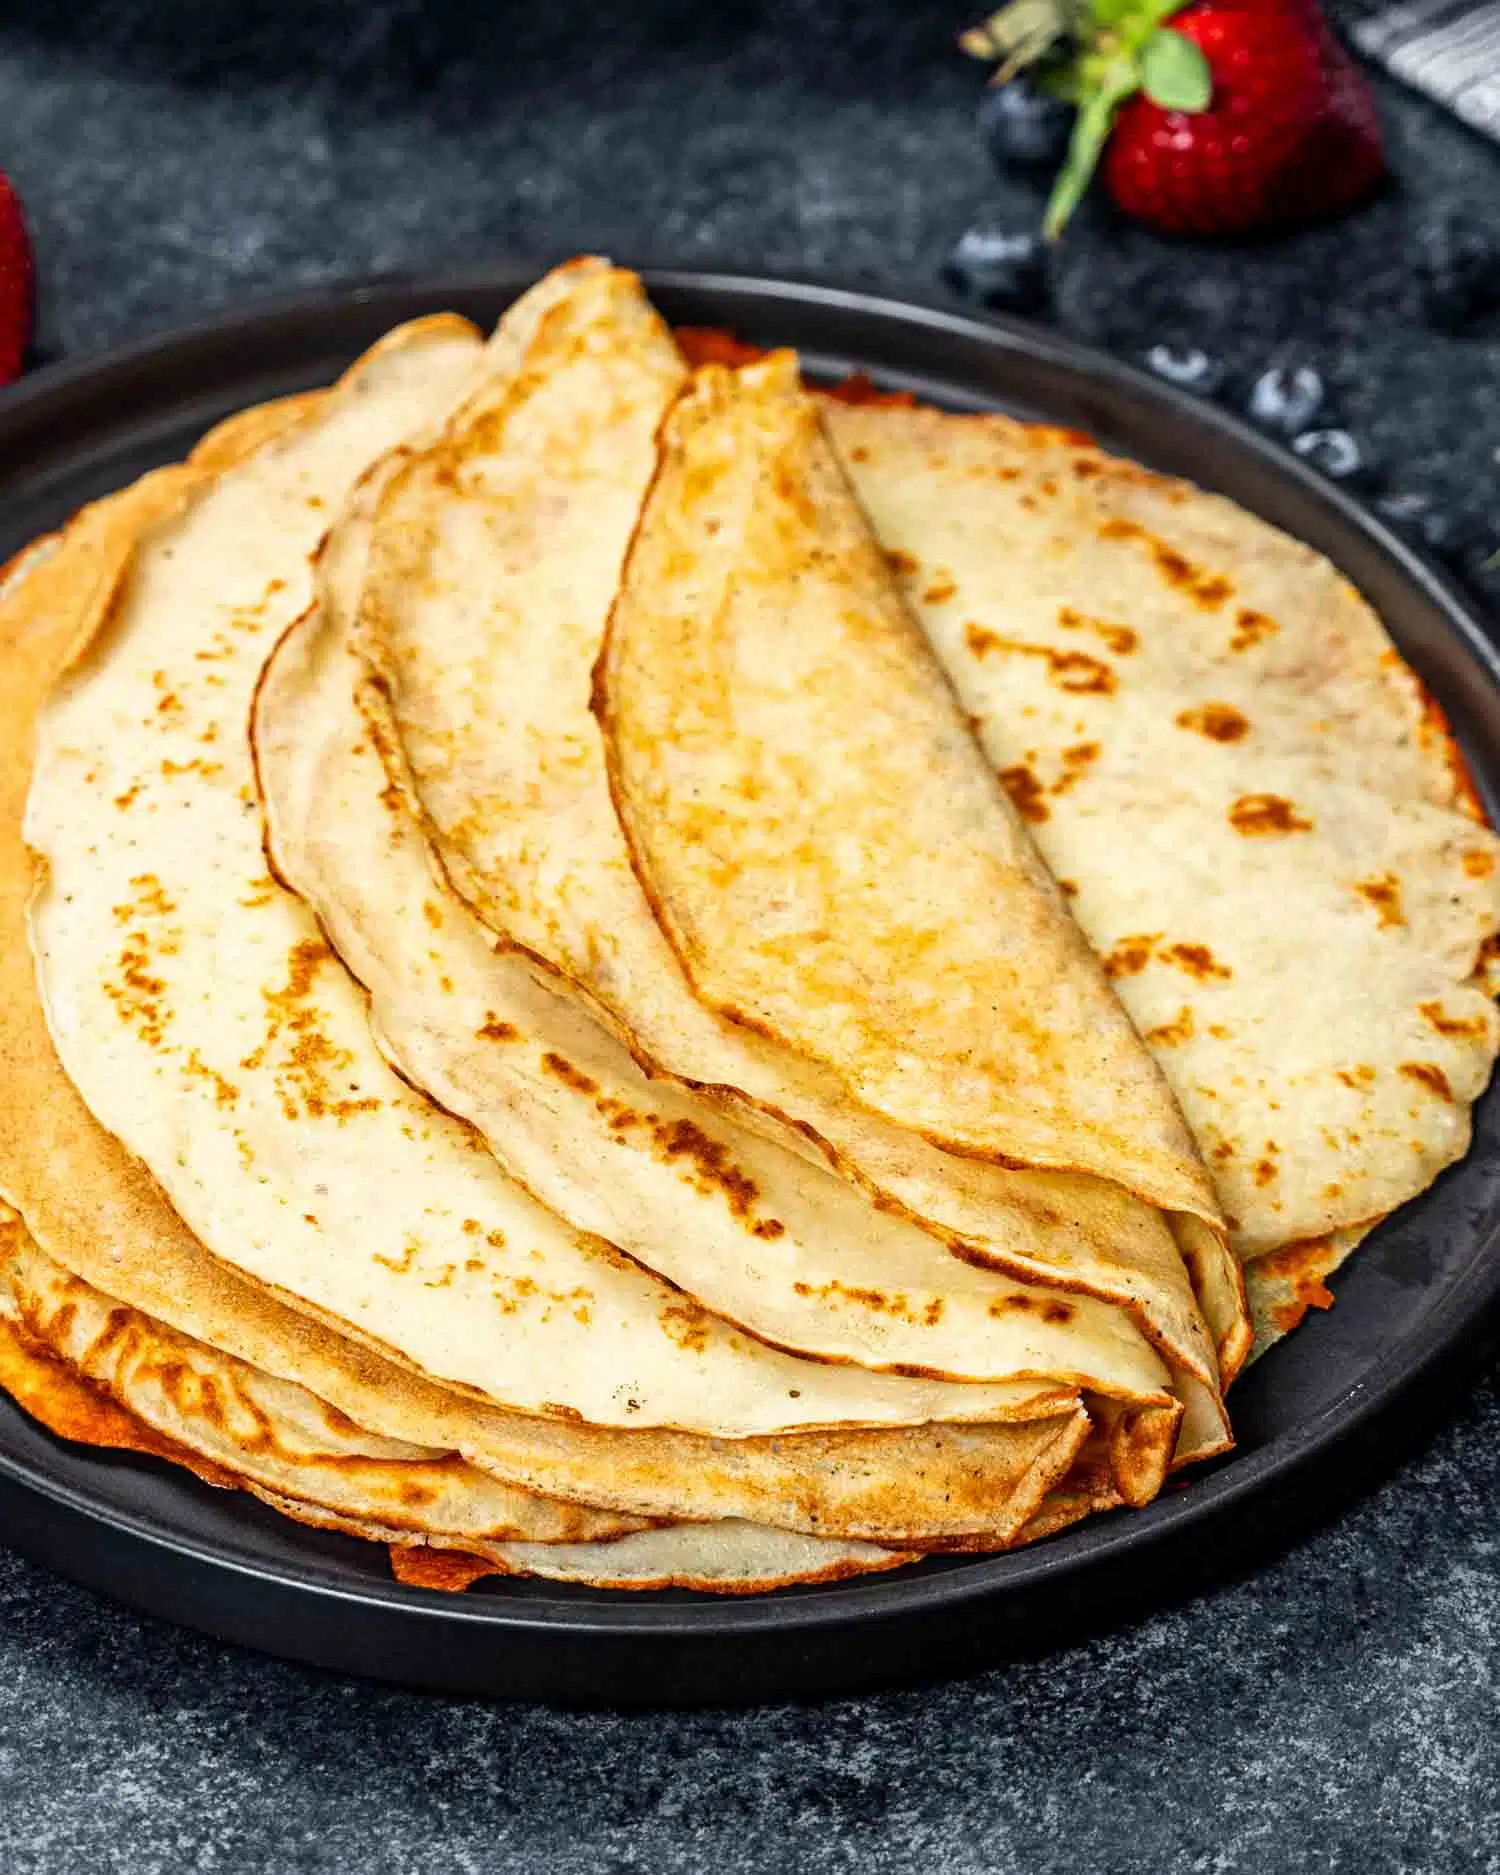 Basic Crepe Recipe - Craving Home Cooked